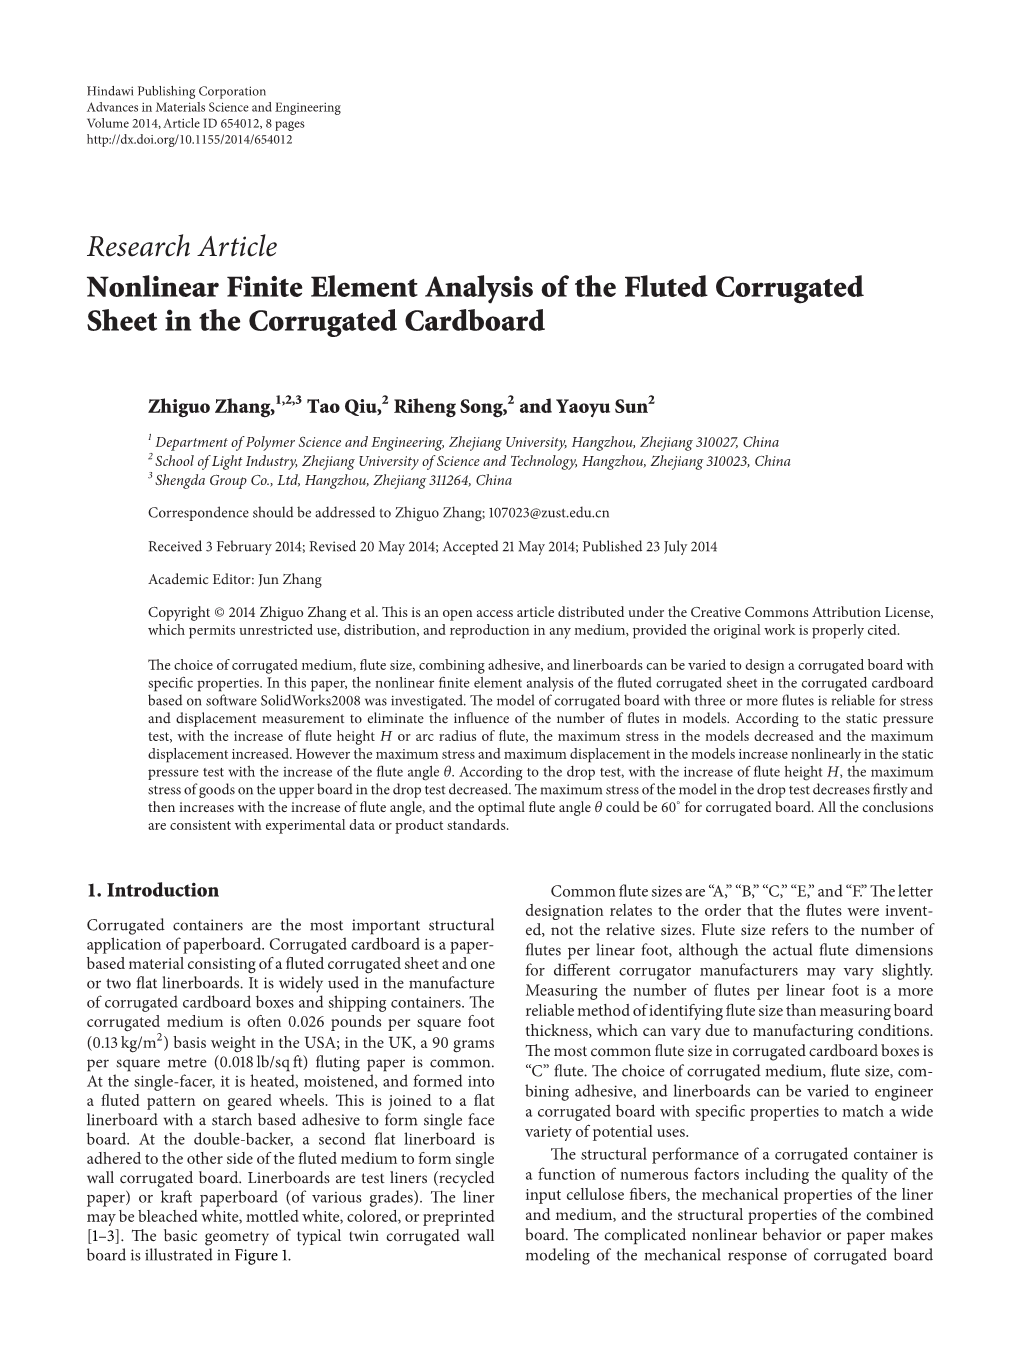 Nonlinear Finite Element Analysis of the Fluted Corrugated Sheet in the Corrugated Cardboard